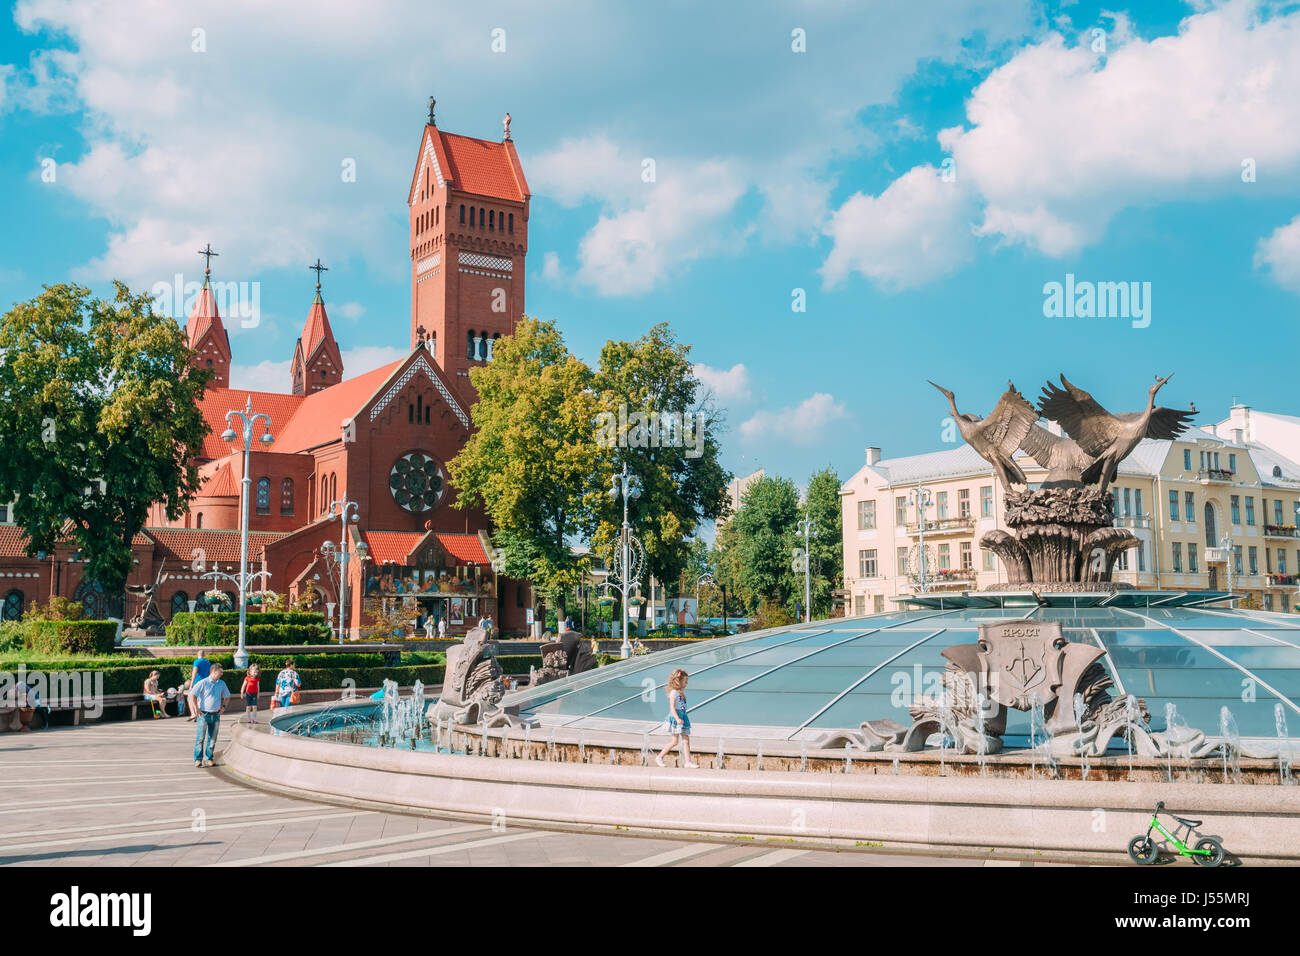 Minsk, Belarus. Glass Dome With Storks Sculpture At Top Of Stolica Stolitsa, Underground Shopping Center At The Independence Square And Catholic Red C Stock Photo